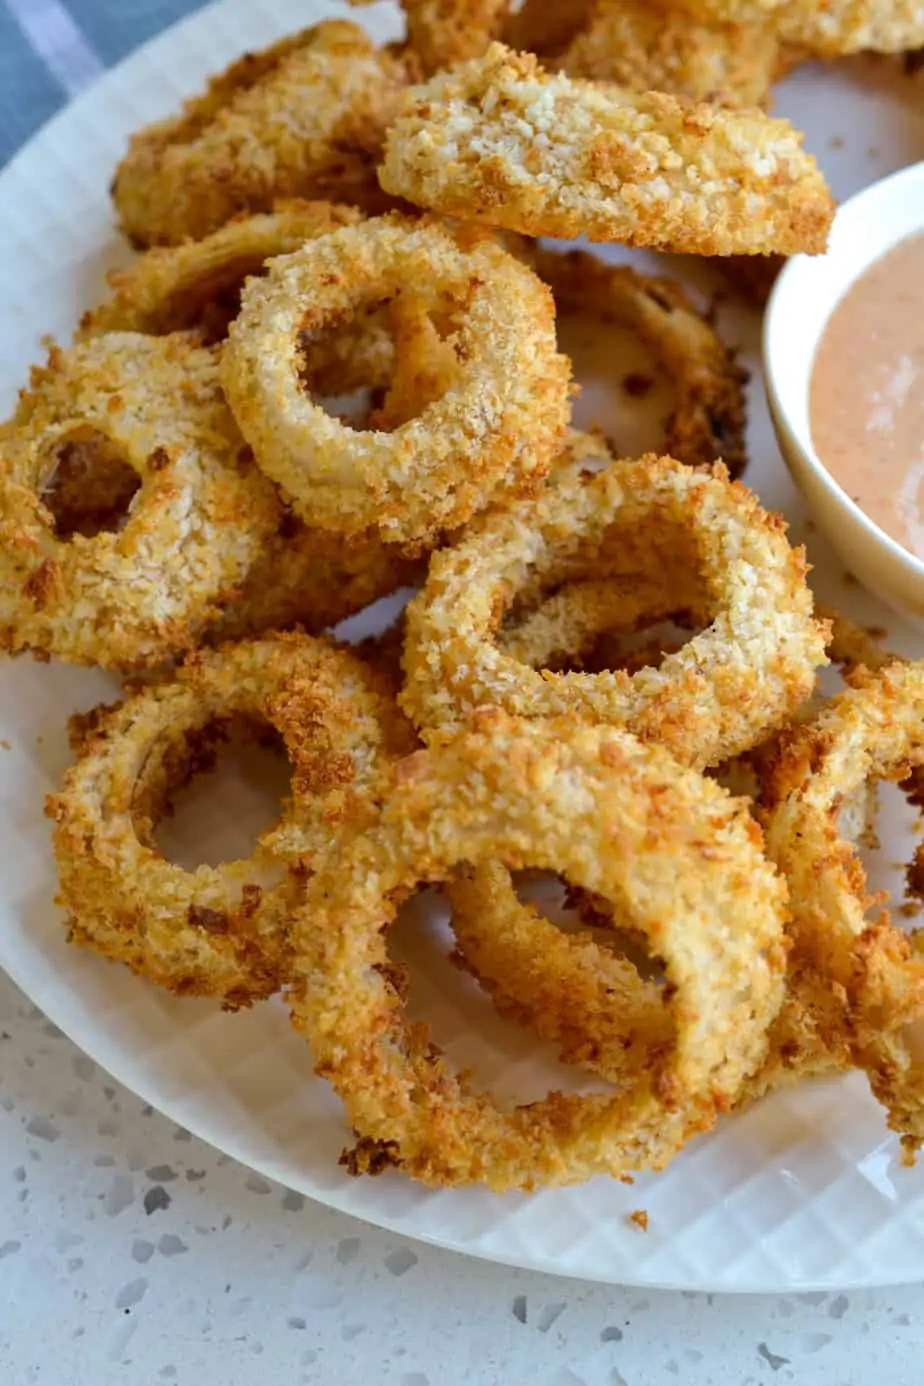 Crisp onion rings that were cooked in the air fryer